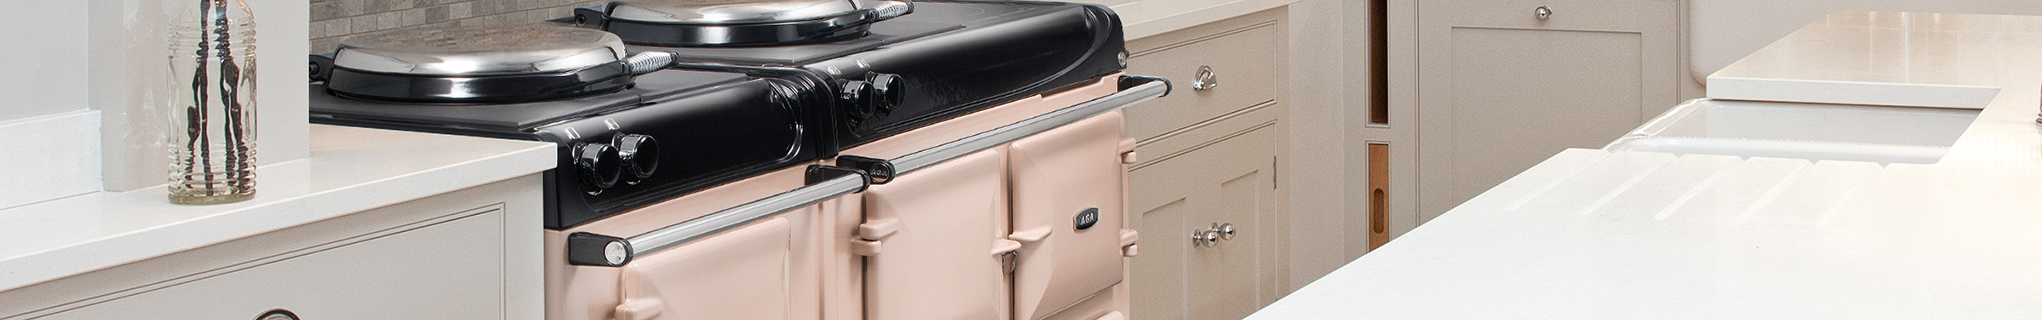 AGA eR3 Series 160 in Blush with white cabinetry 